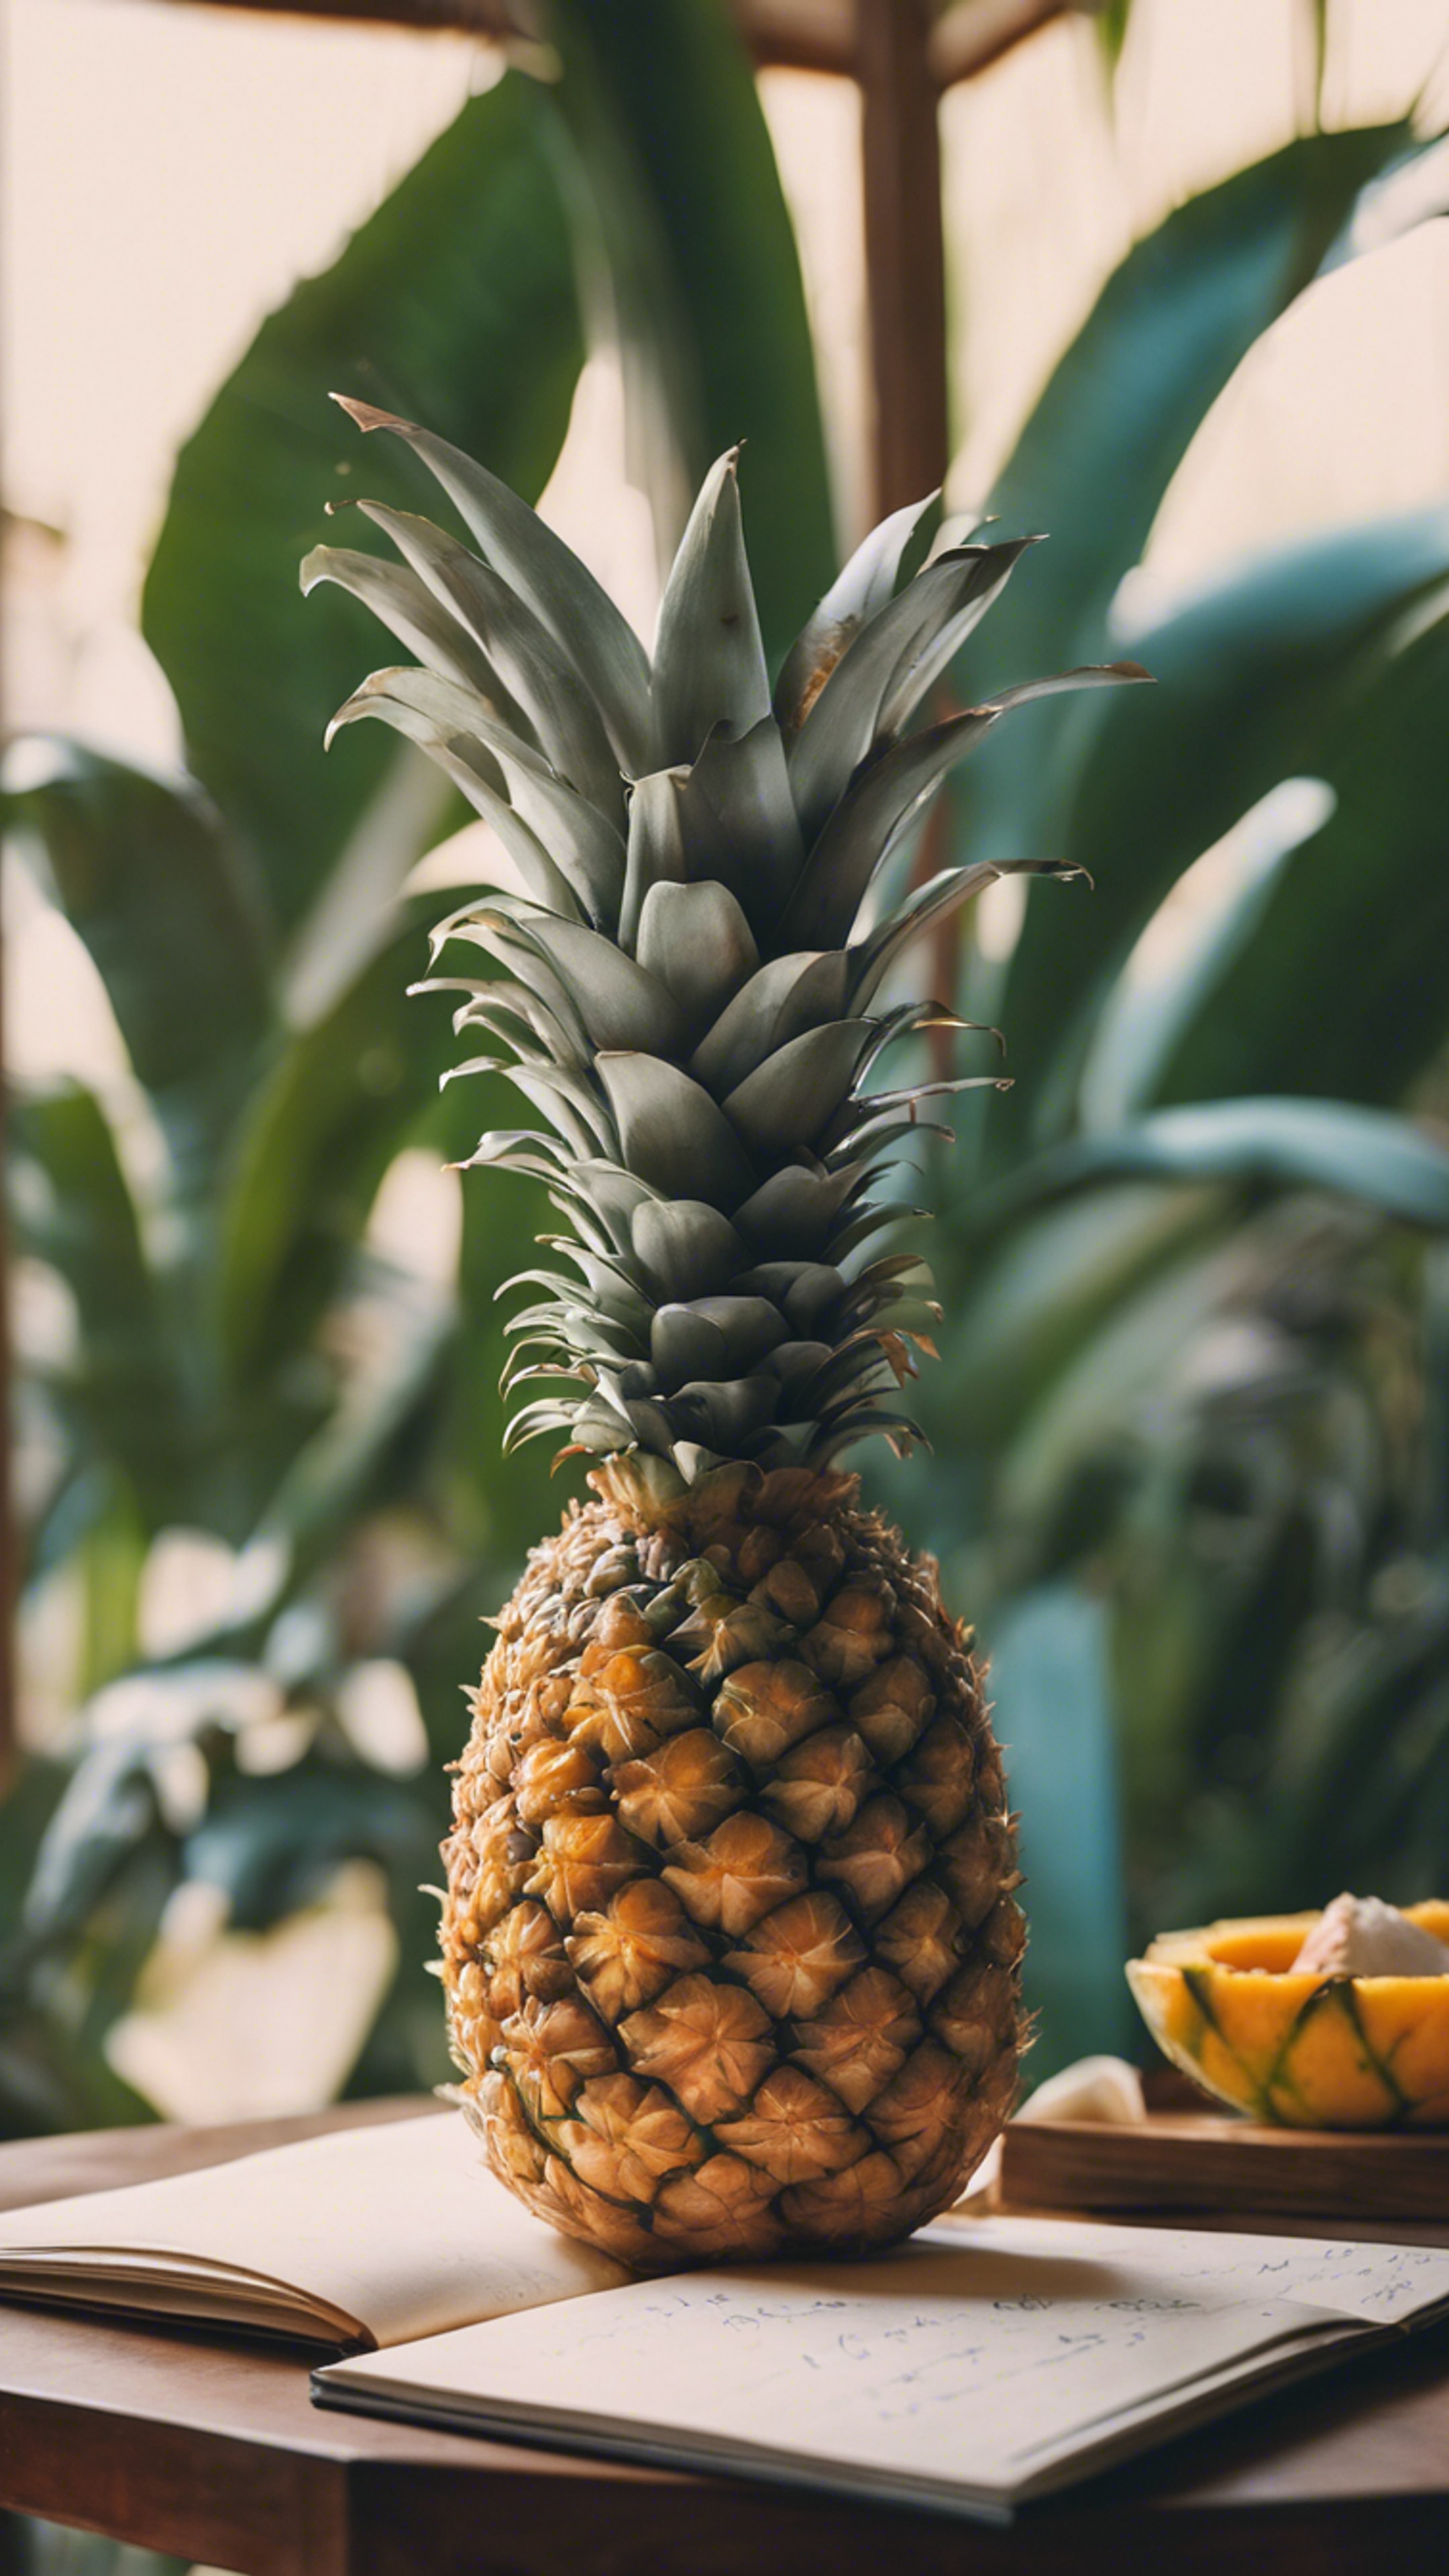 A pineapple writing a love letter to mango. Kertas dinding[5c766a7f73424ecca75d]